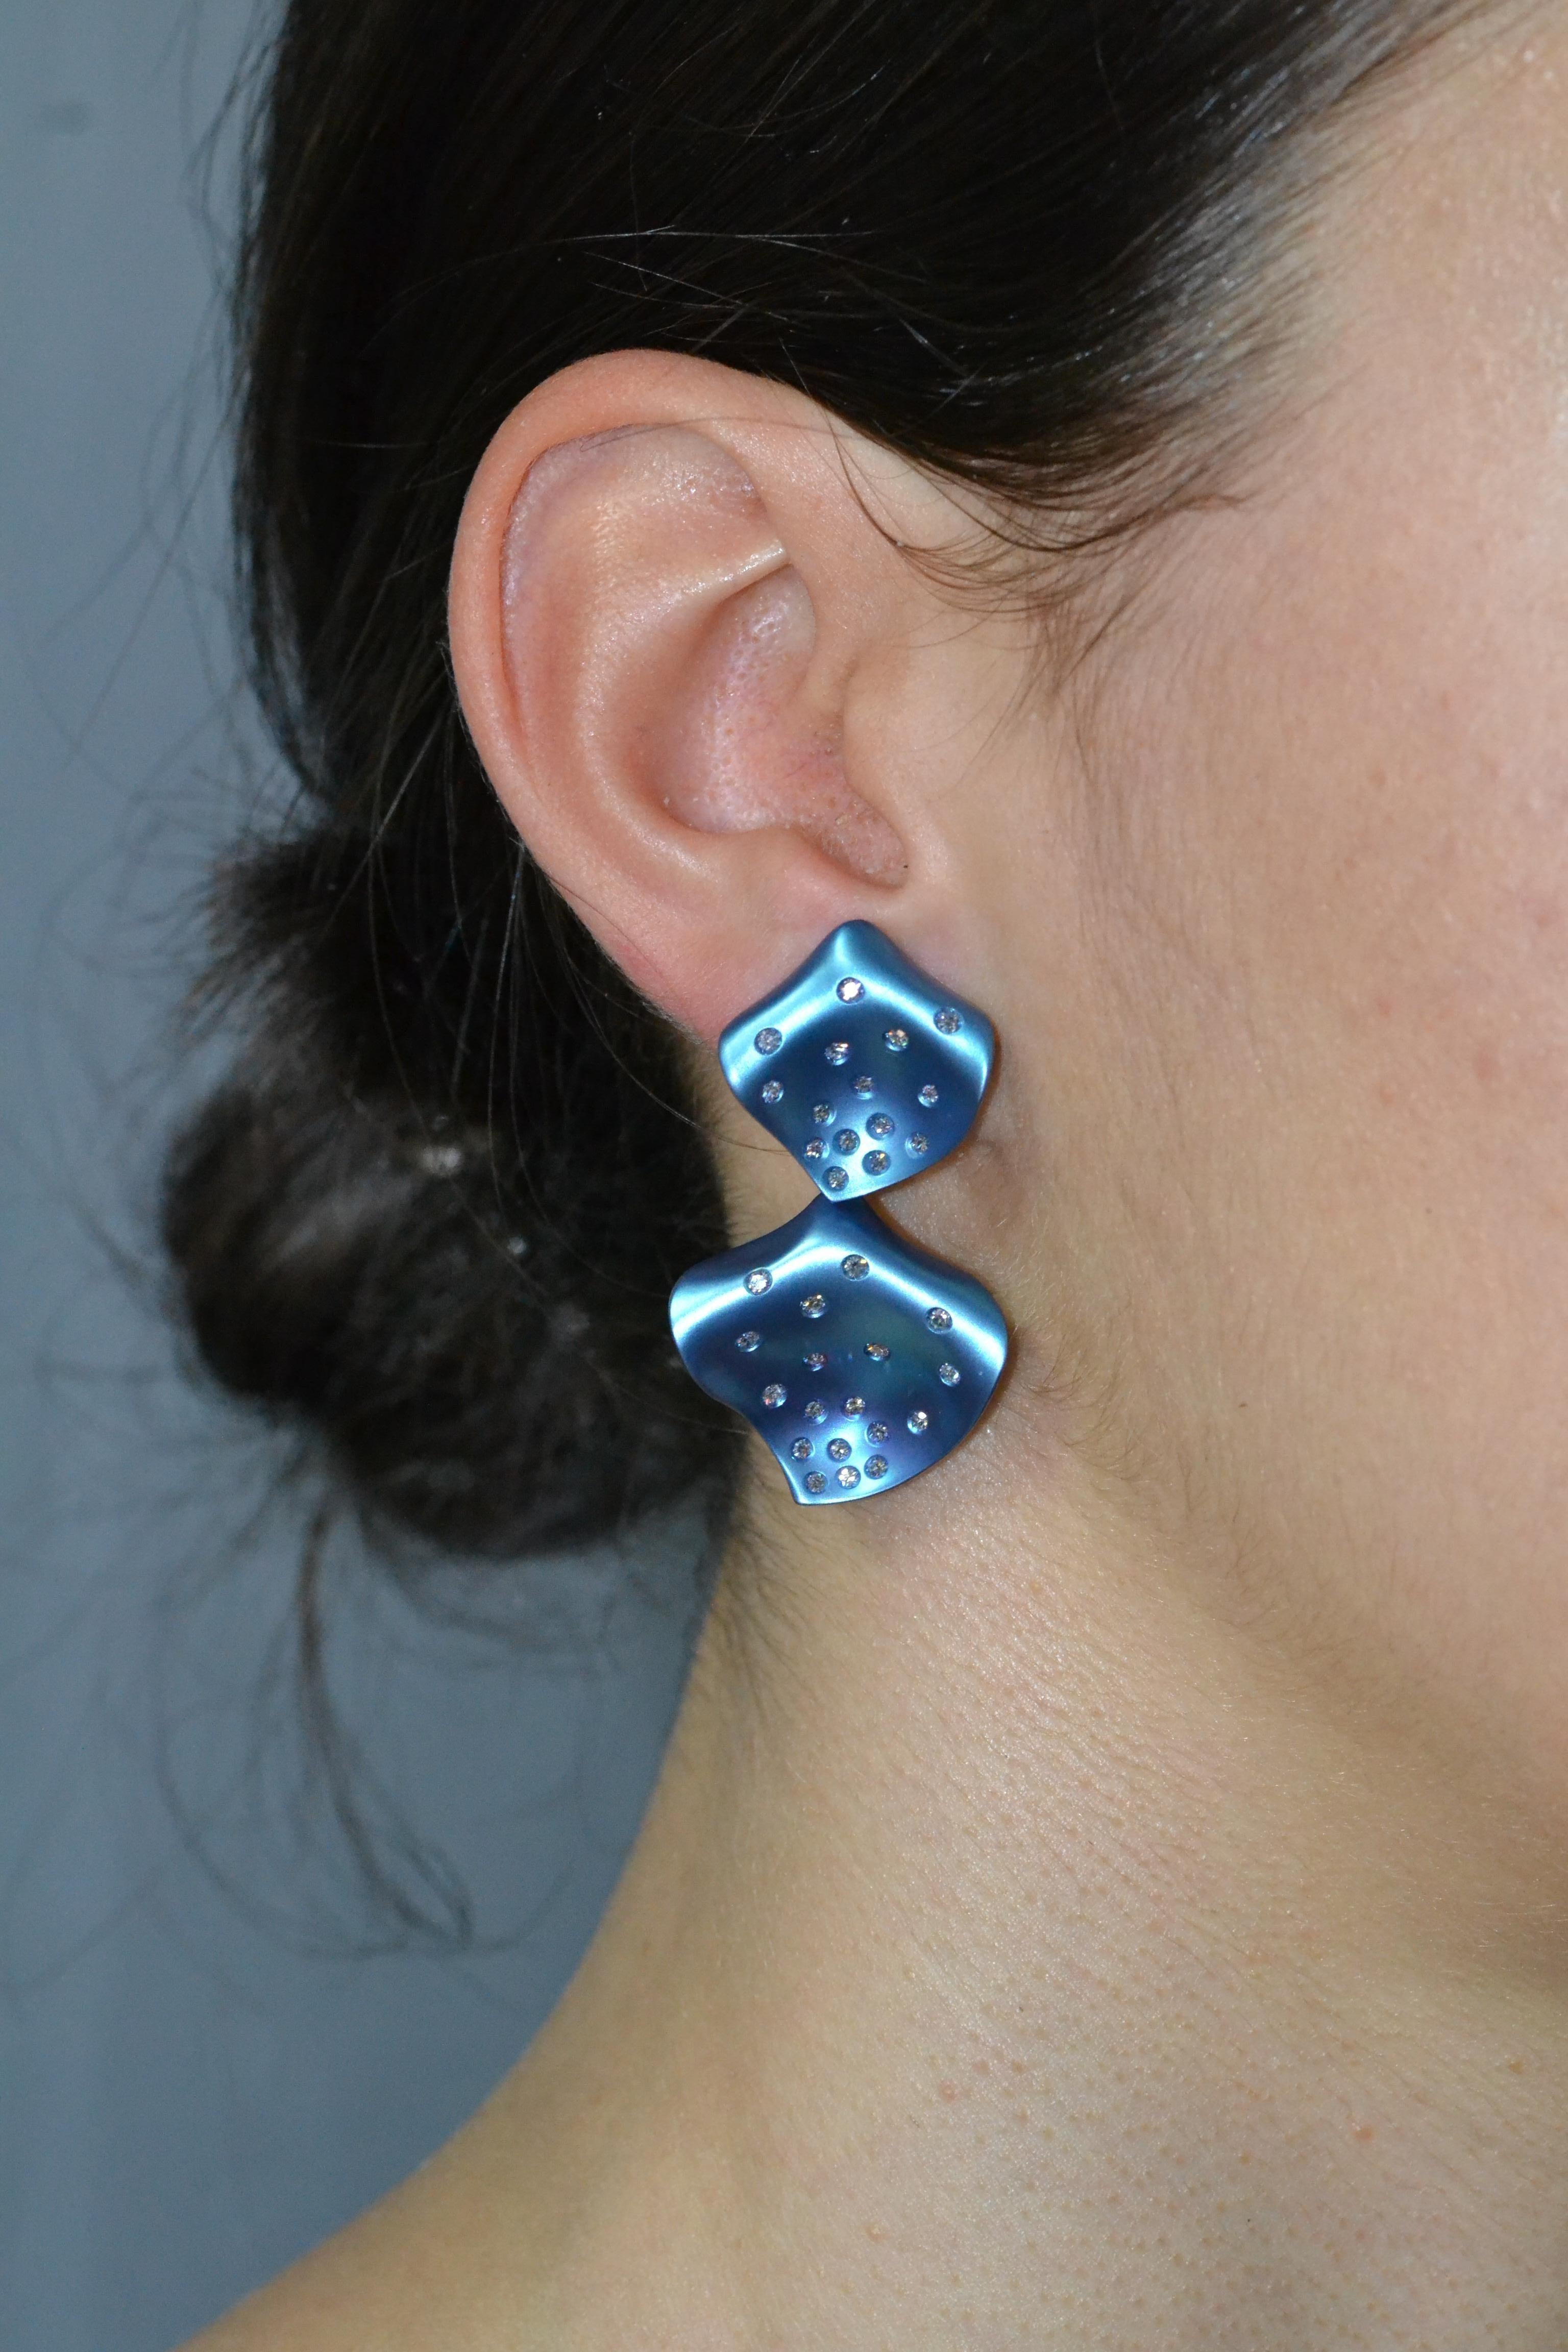 Handcarved earrings in titanium, oxidized petrol blue titanium (color in titanium is stable).
The lightness of titanium make them very comfortable and enjoyable.
Featuring fittings and butterflies.

18 KT white gold grams 1.16
n. 67 diamond total